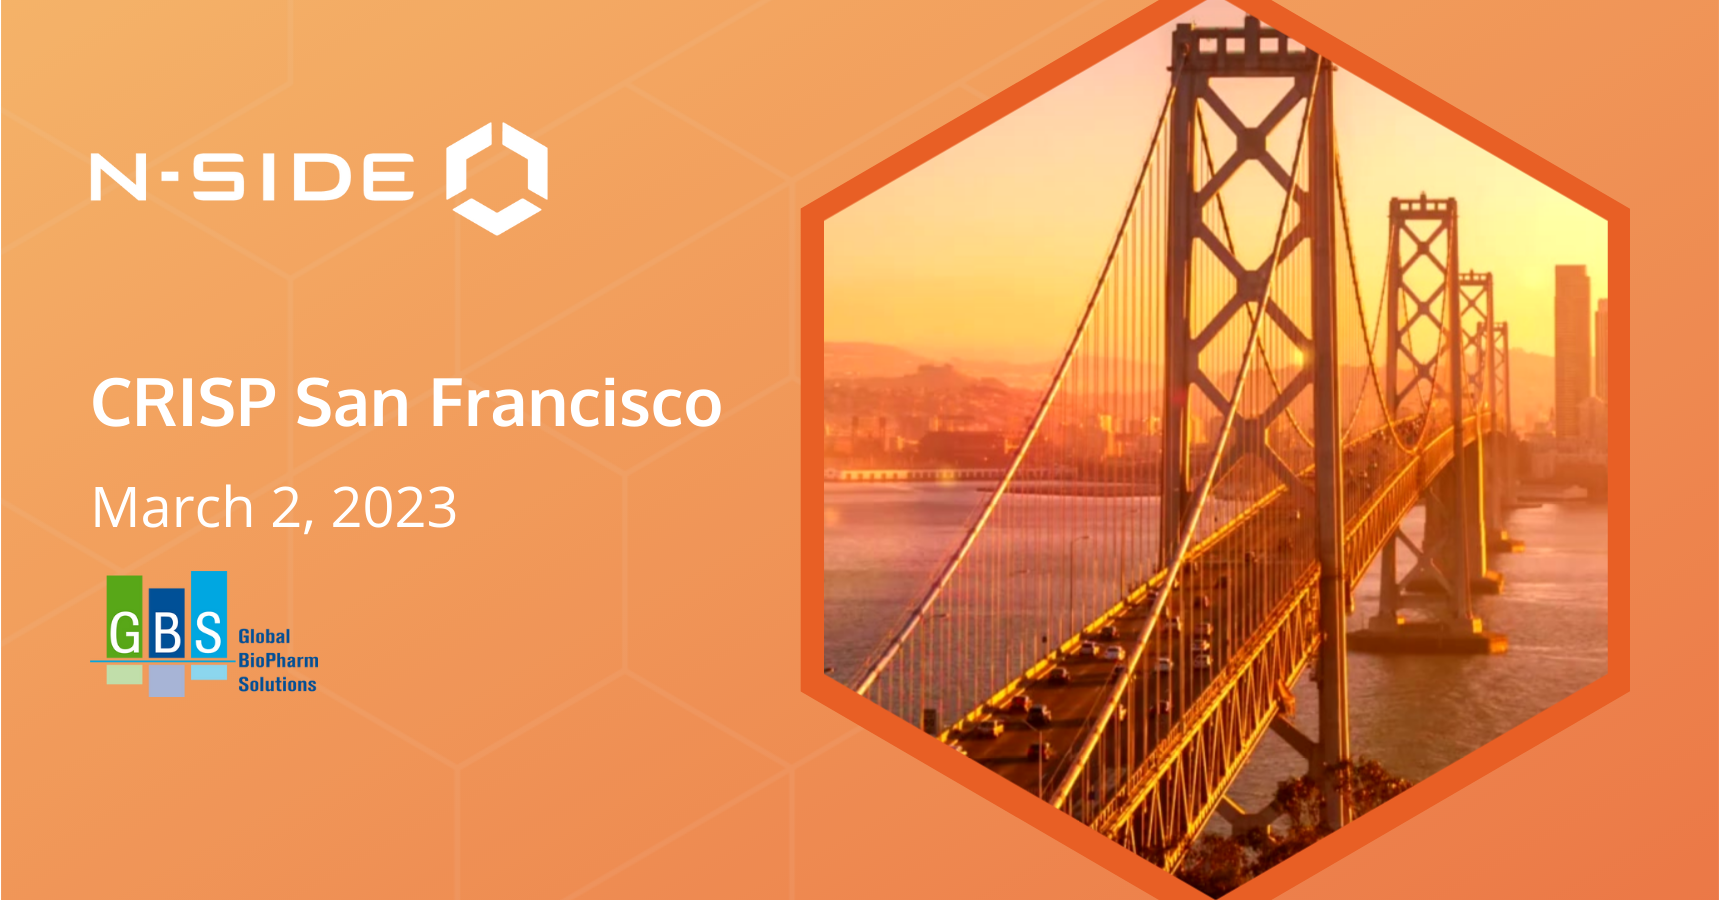 Orange background picture of San Francisco with GBS & N-SIDE logos